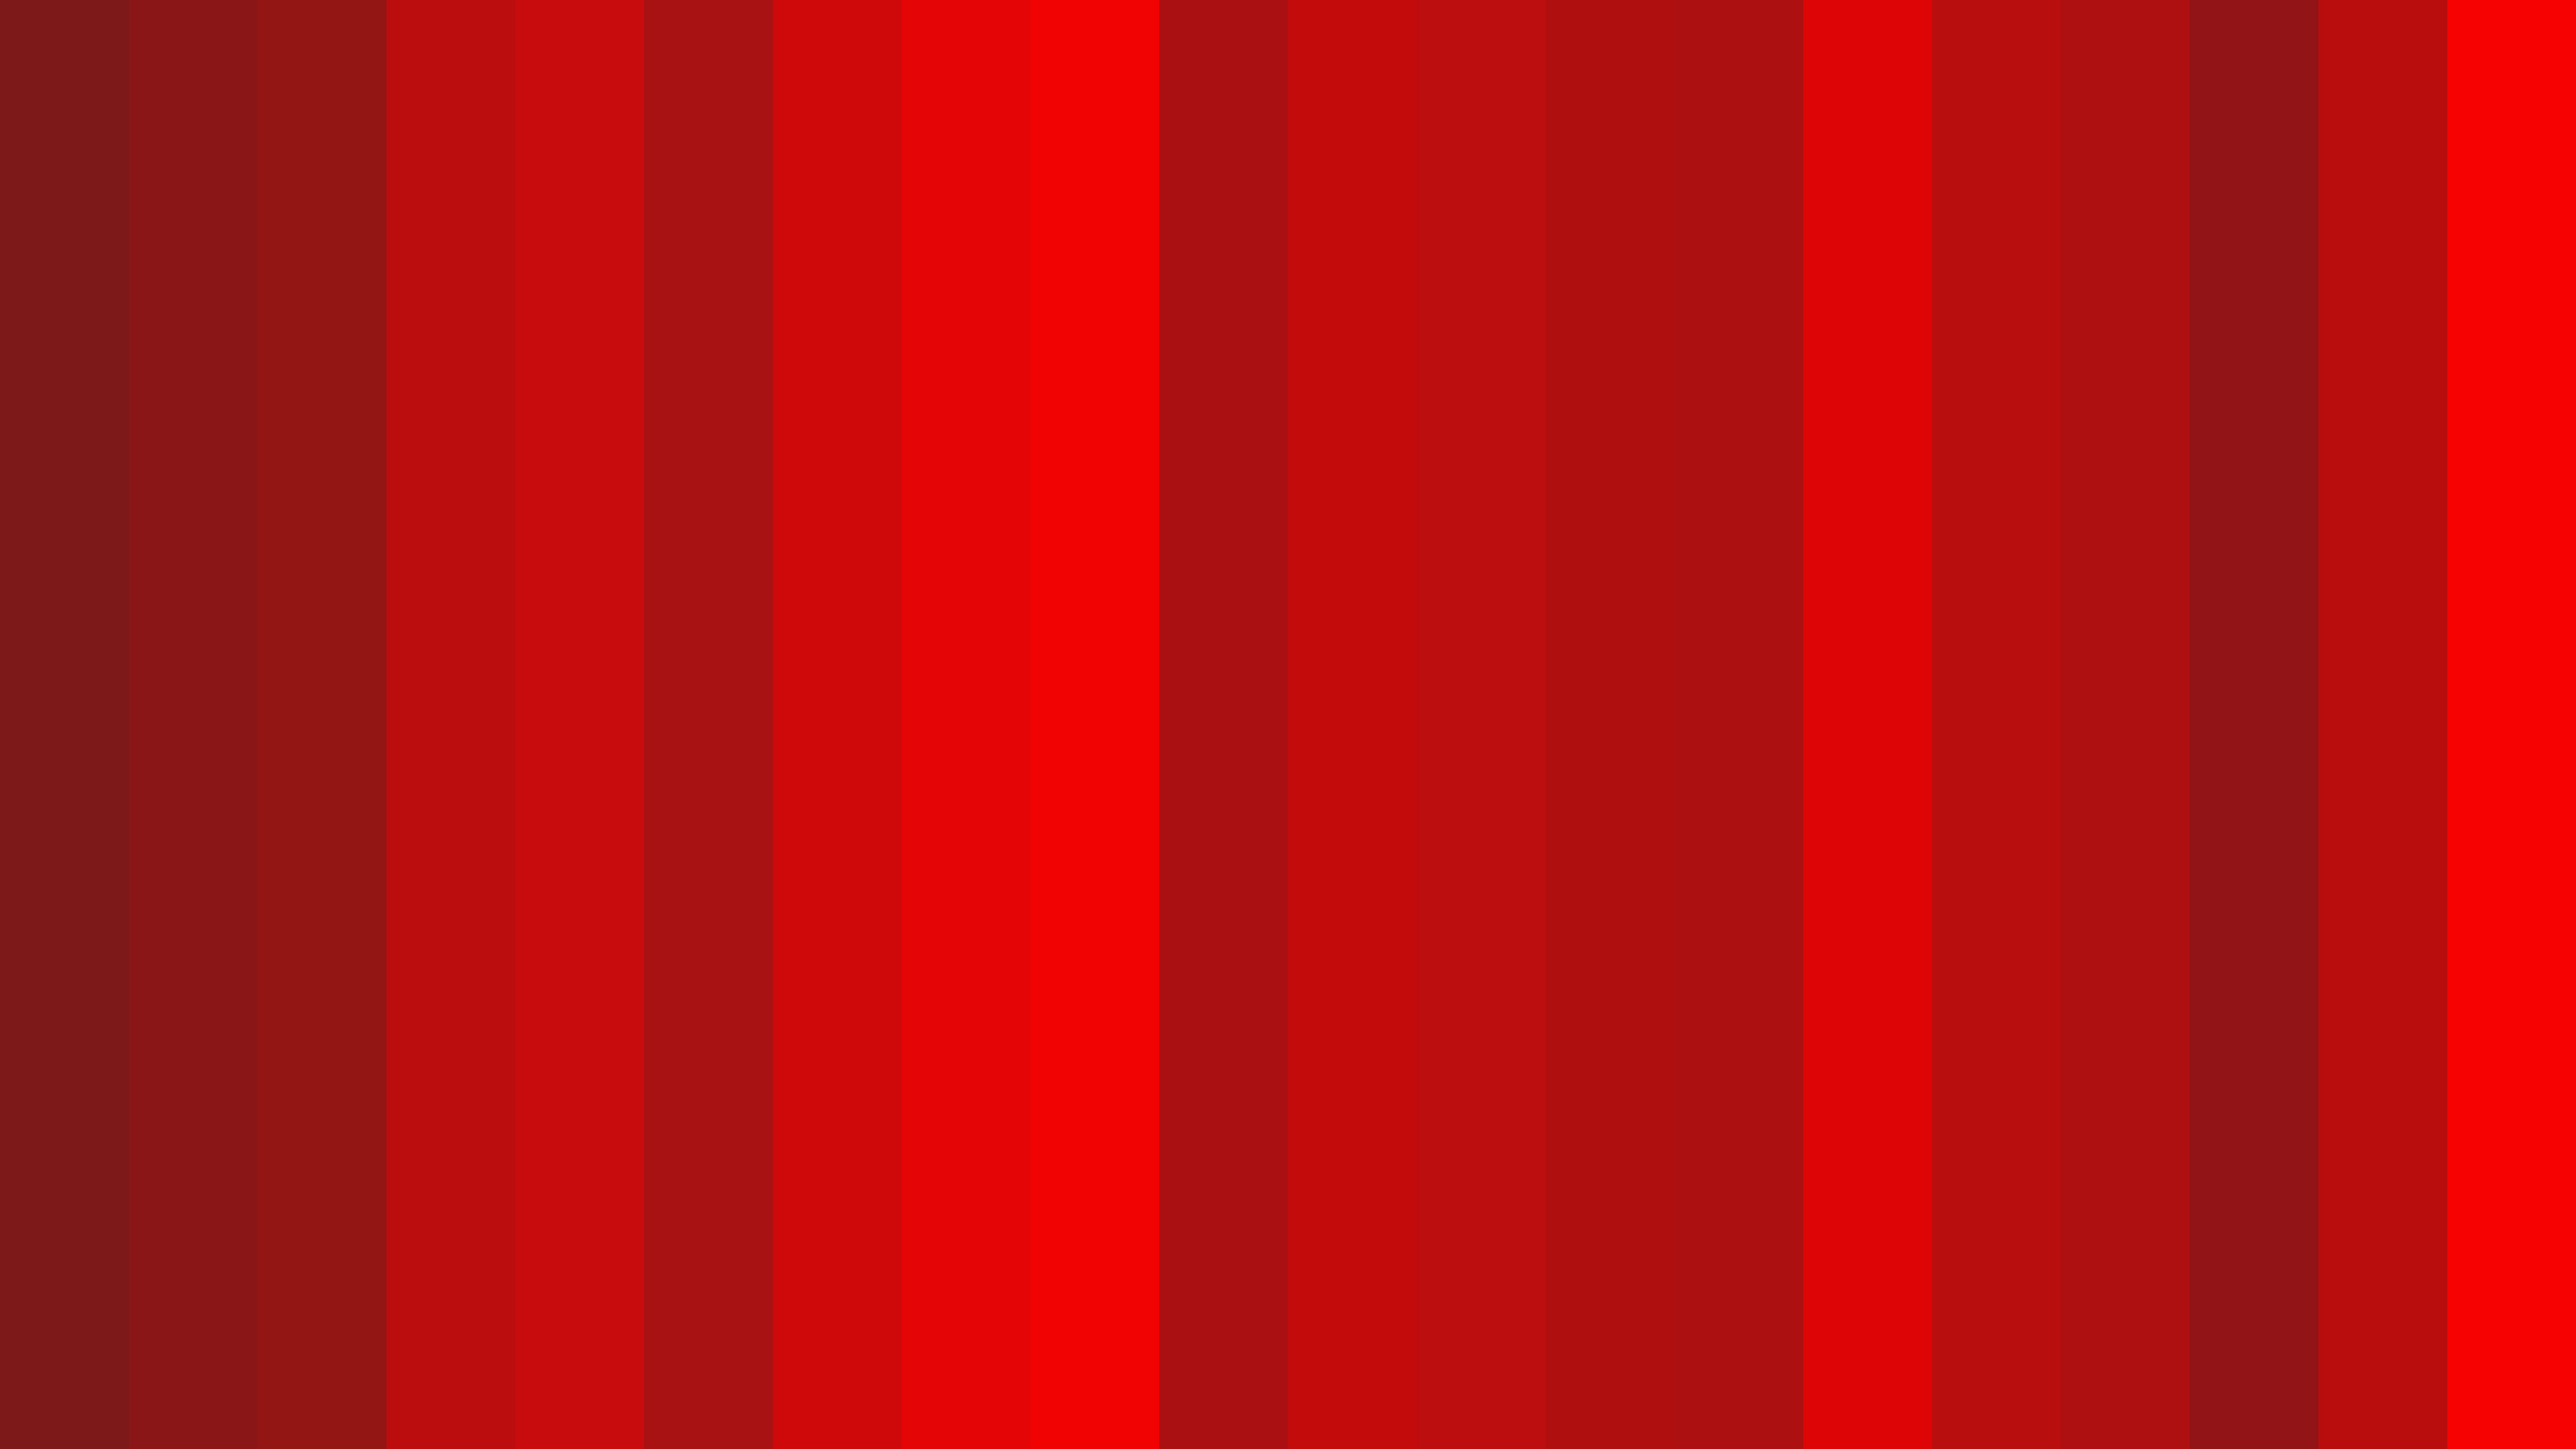 Free Red Striped background Illustrator